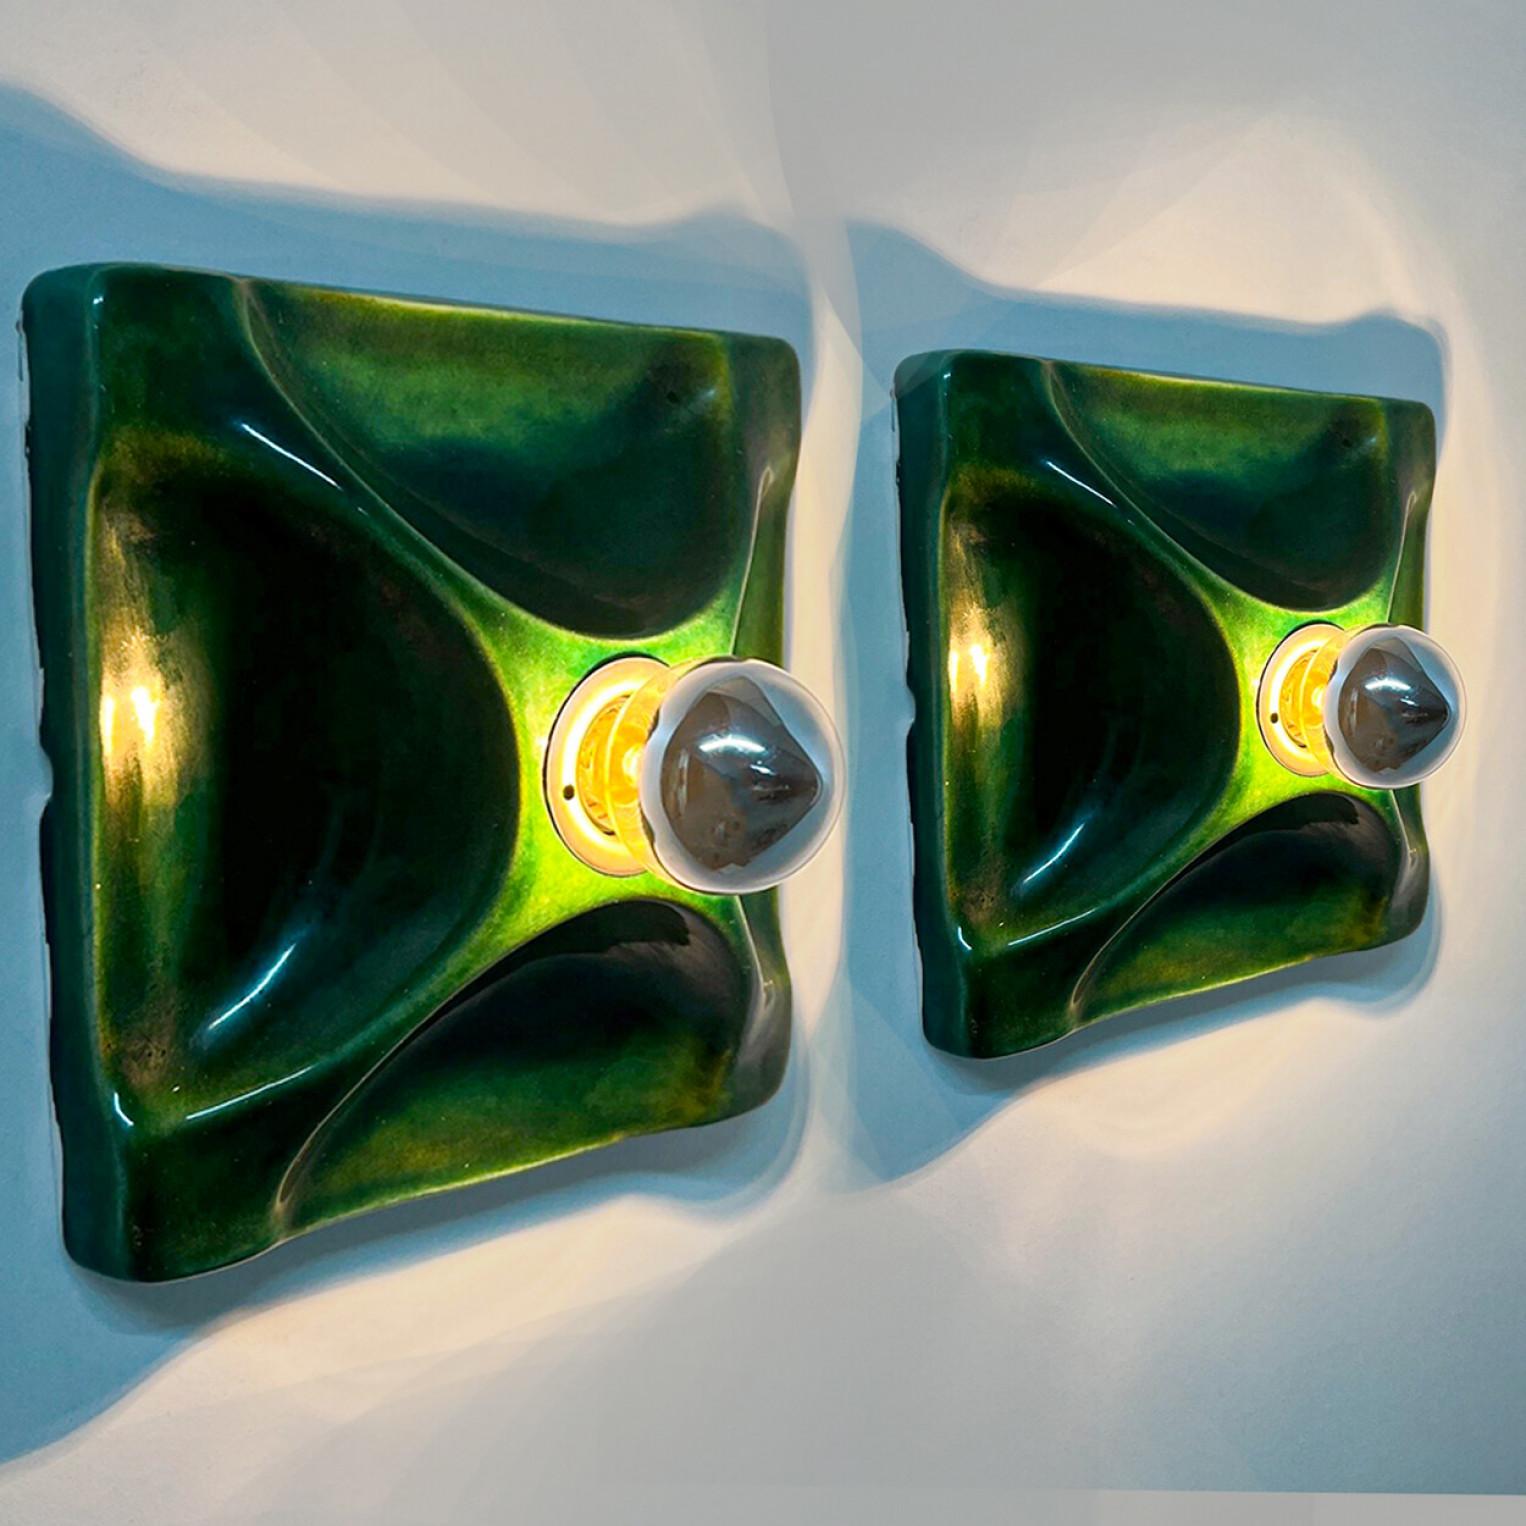 Pair of Green square-shaped ceramic wall lights/flush mounts  in Fat Lava style.

Manufactured by in Germany in the 1970s. The base of the light is square and there is a beautiful ceramic cross on top of that.

This lights have a unusual shape. This